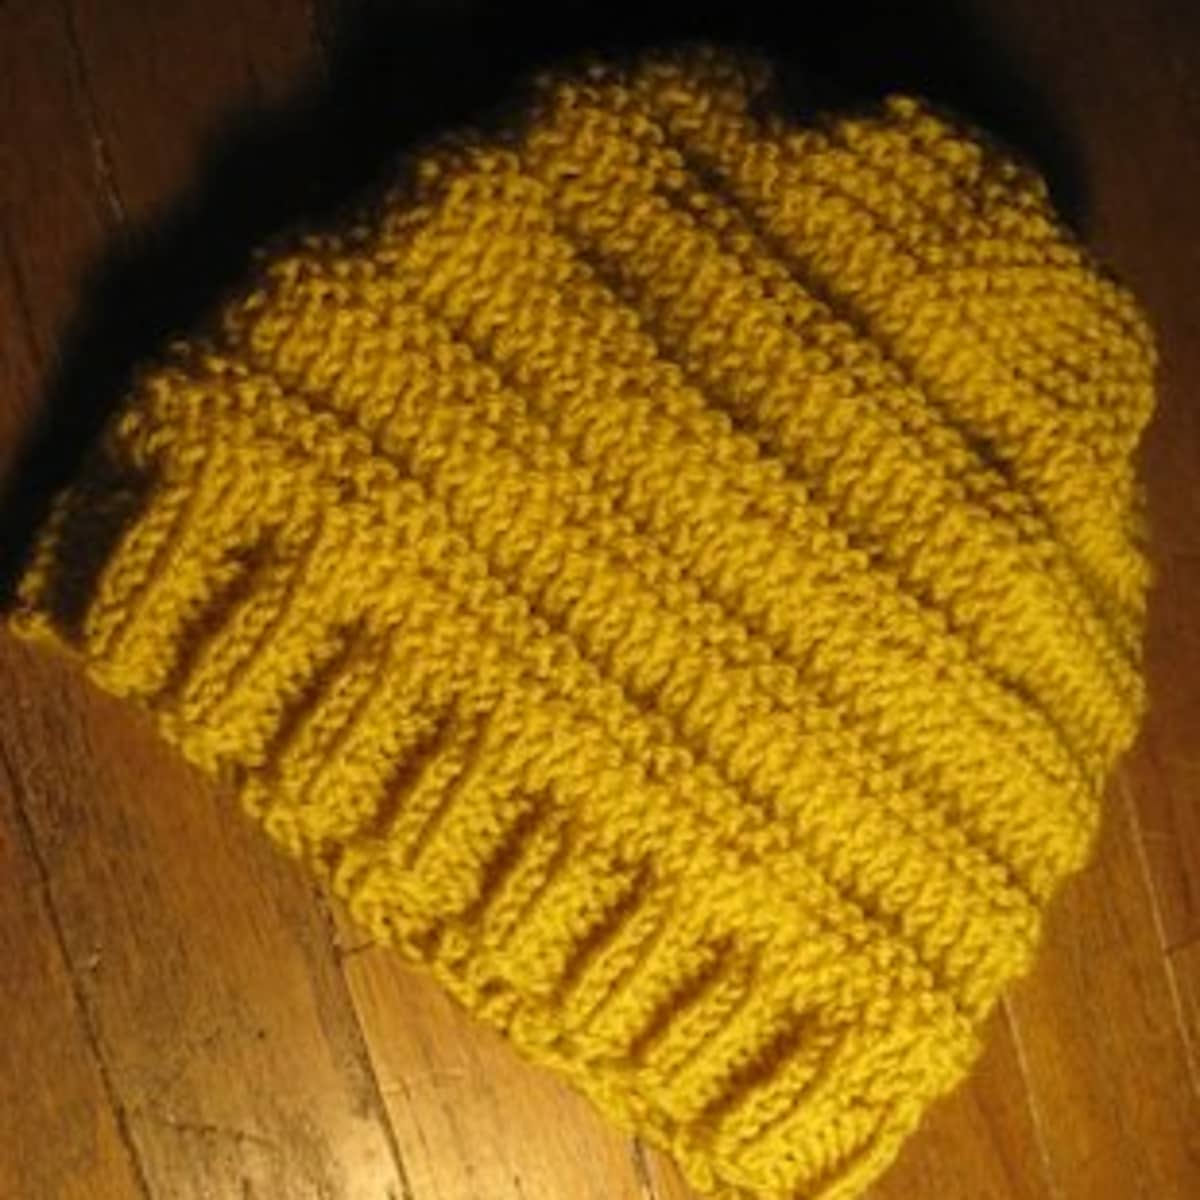 Free Easy Knit Beanie Hat Pattern for Circular Needles - Craft Fix